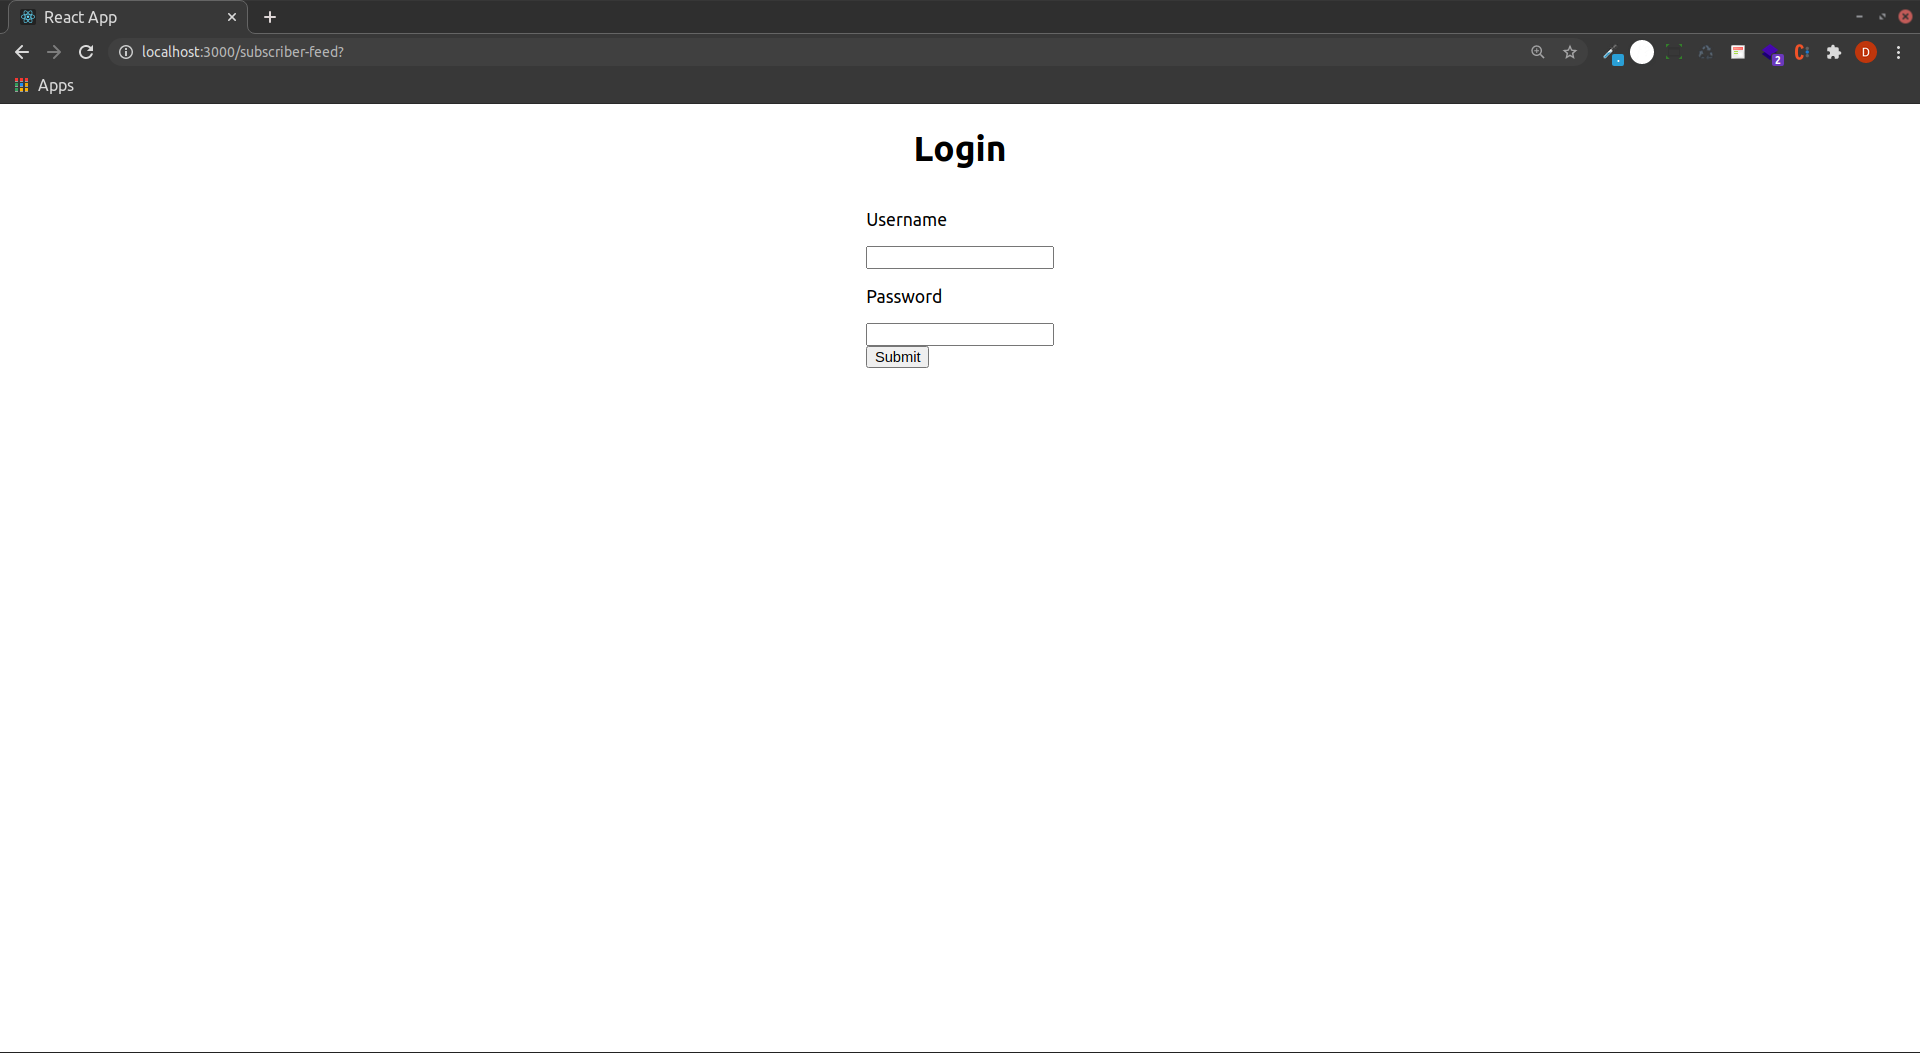 Screencapture of the React application login form showing username and password input boxes